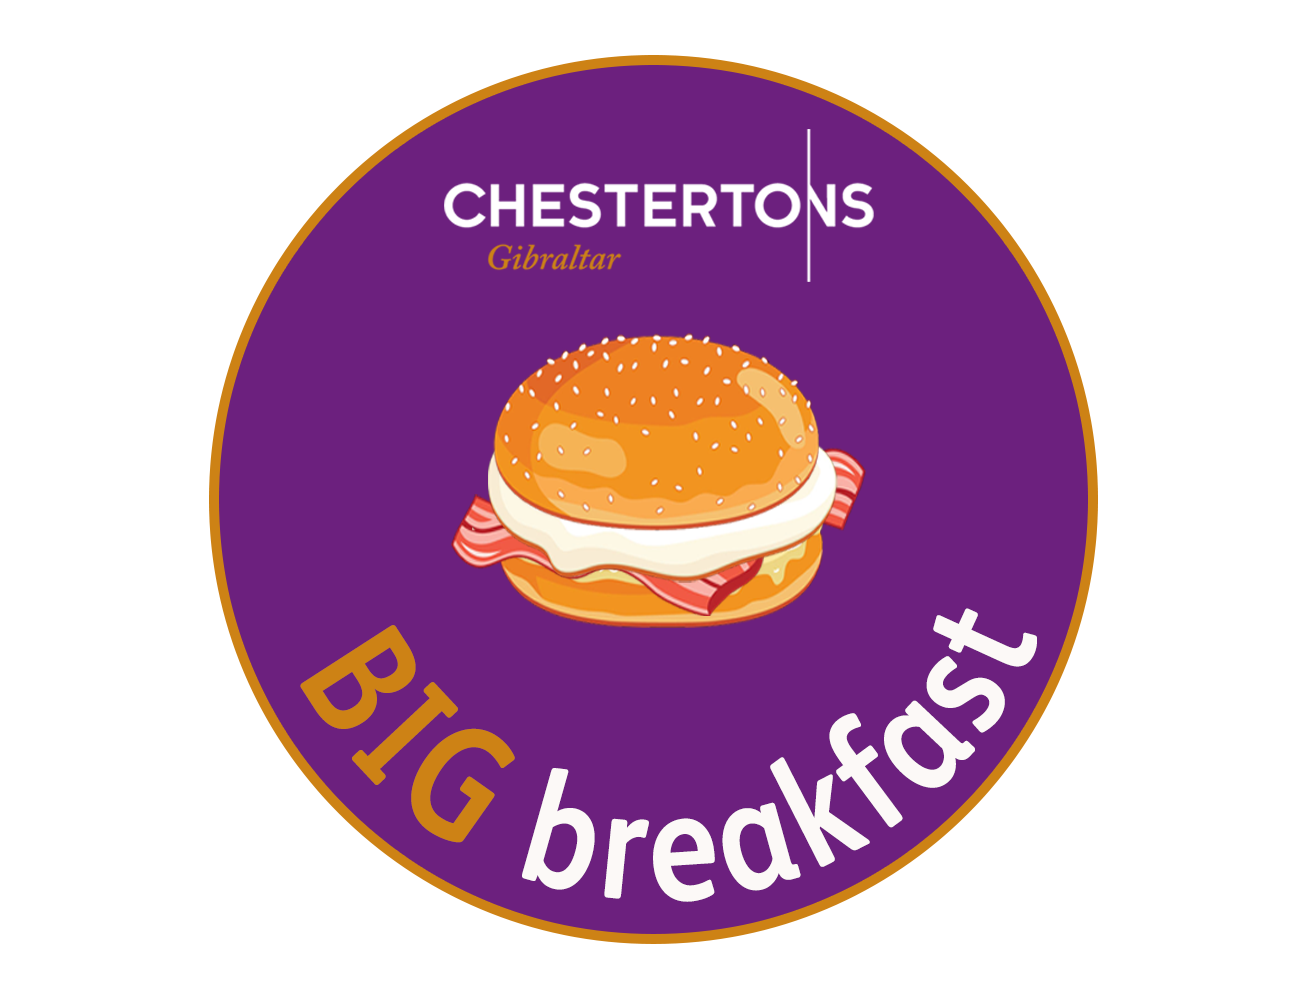 Save the date - Wednesday 11th December - the BIG Breakfast is back Image